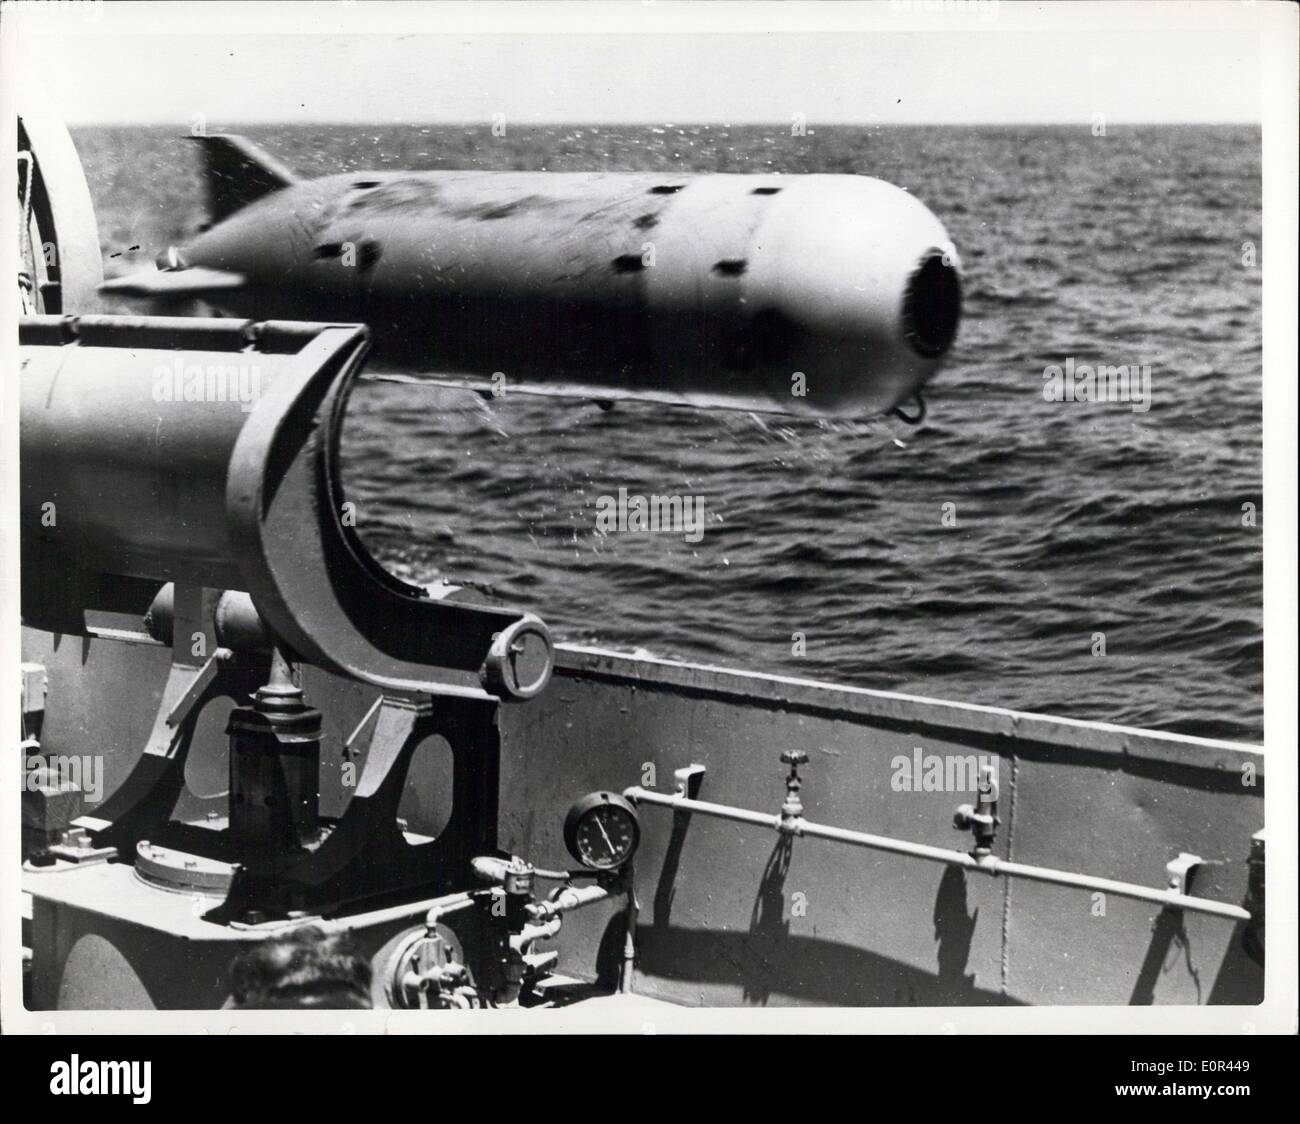 Jan. 15, 1958 - Leaving its Launcher, the Navy's latest acoustic-homing torpedo, the Mk 32, starts it relentless and unearing search for its target. Through its homing capabilities the torpedo is able to track down and sink any type submarine. A new acoustic-homing torpedo,the MK 32, has been developed by the U.S. Navy. Capable of tracking down and sinking submarines, the MK 32 is now in use with surface units of the fleet Stock Photo